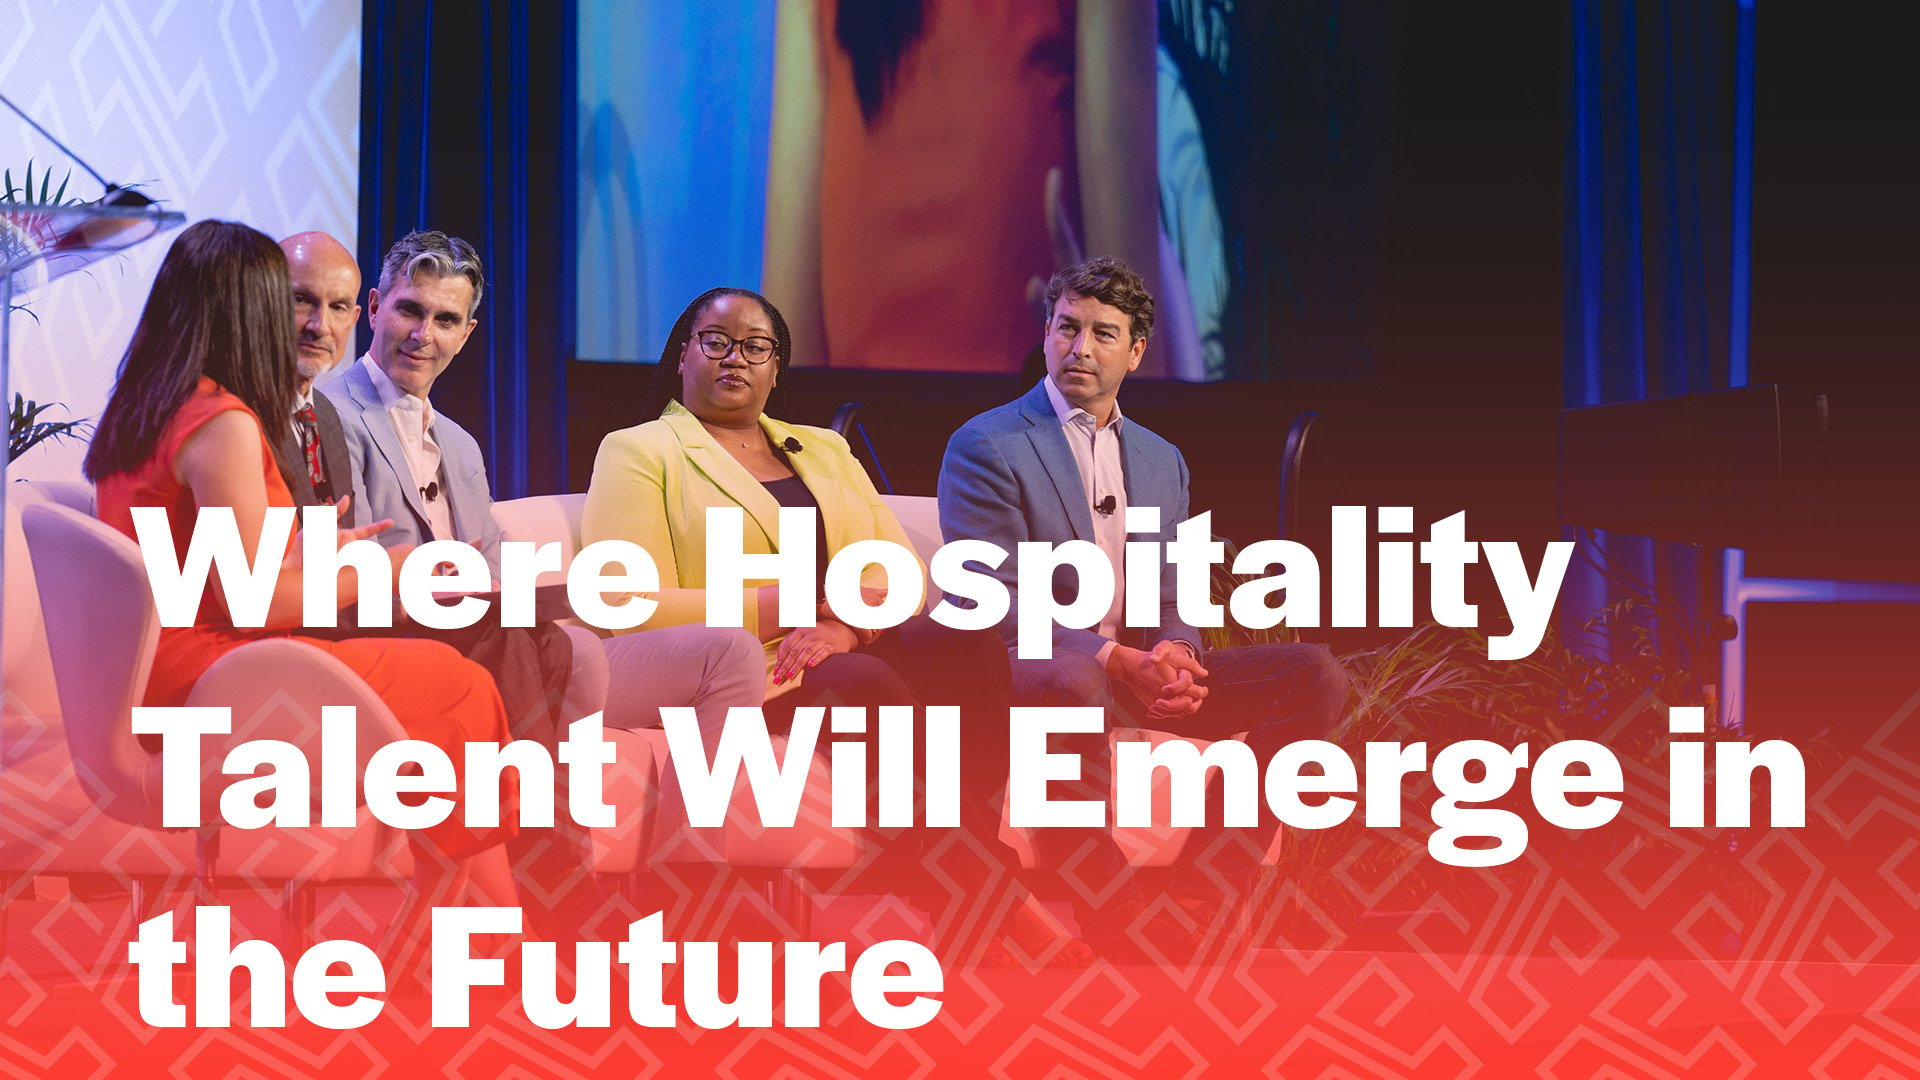 The Hospitality Show Where Hospitality Talent Will Emerge in the Future